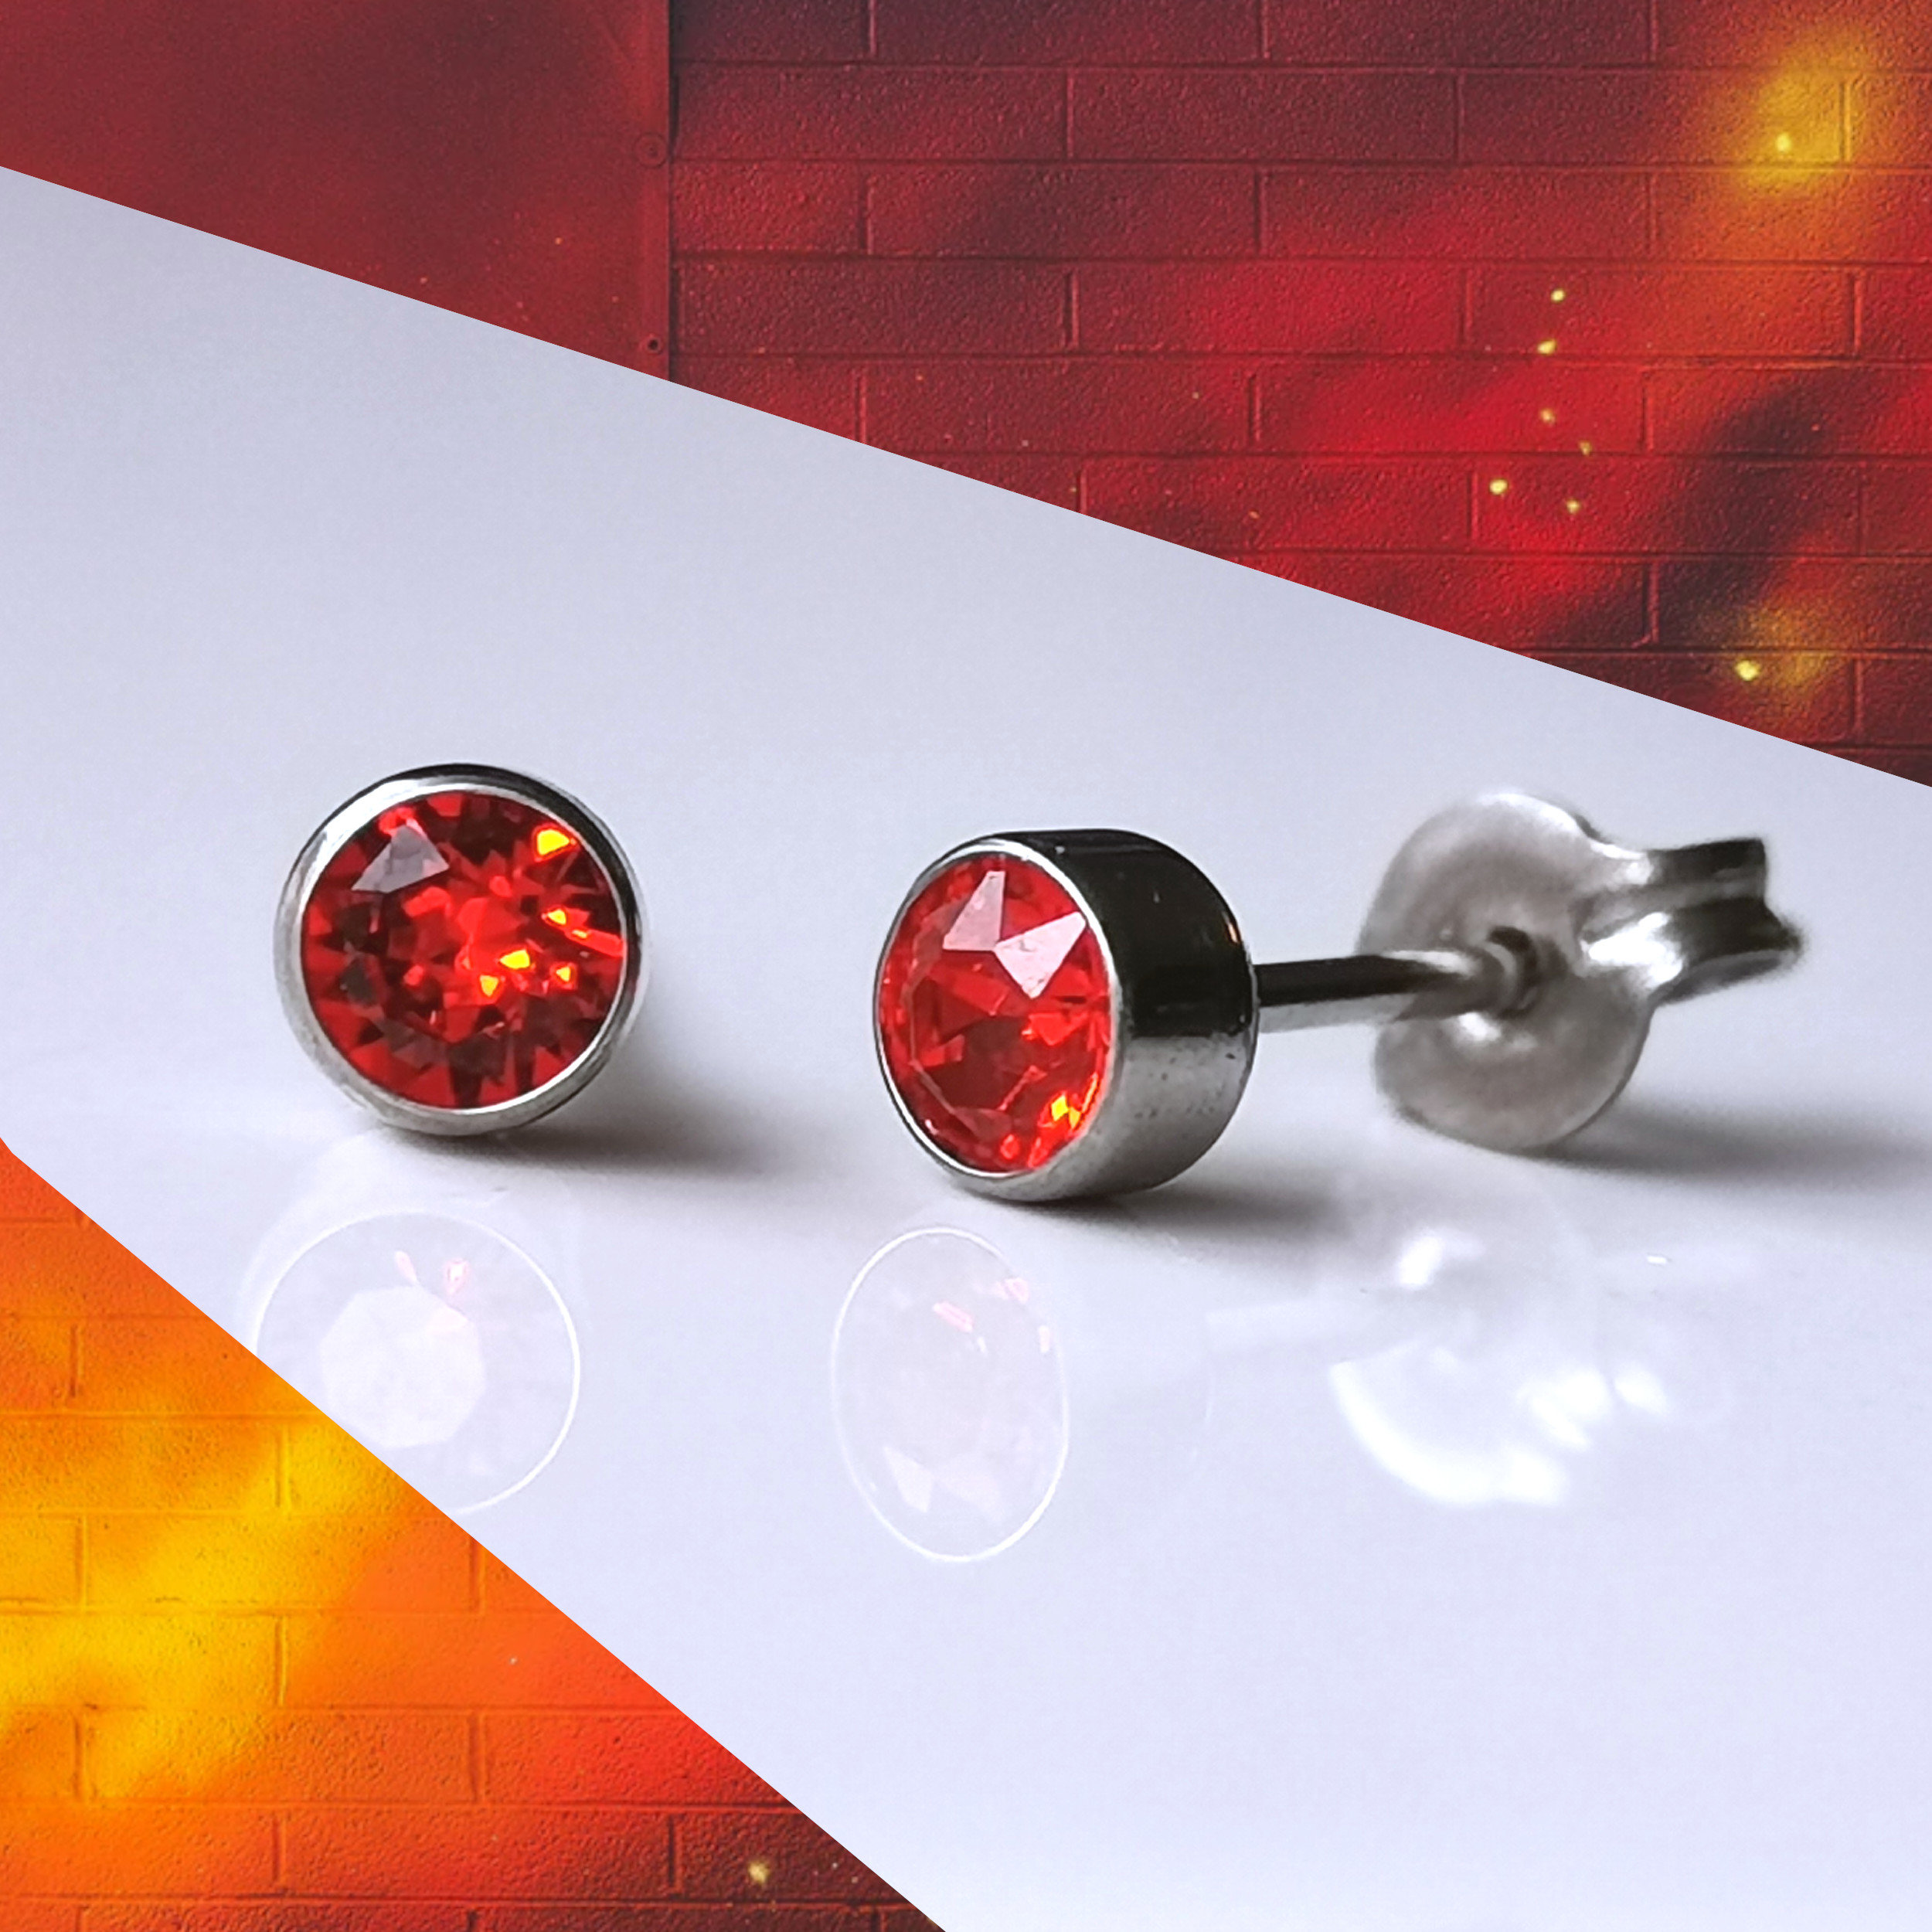 rygai 1 Pair Ear Studs Non-Piercing Magnetic Stainless Steel Round Colored  Rhinestone Embedded Men Women Earrings Fashion Jewelry,Red - Walmart.com